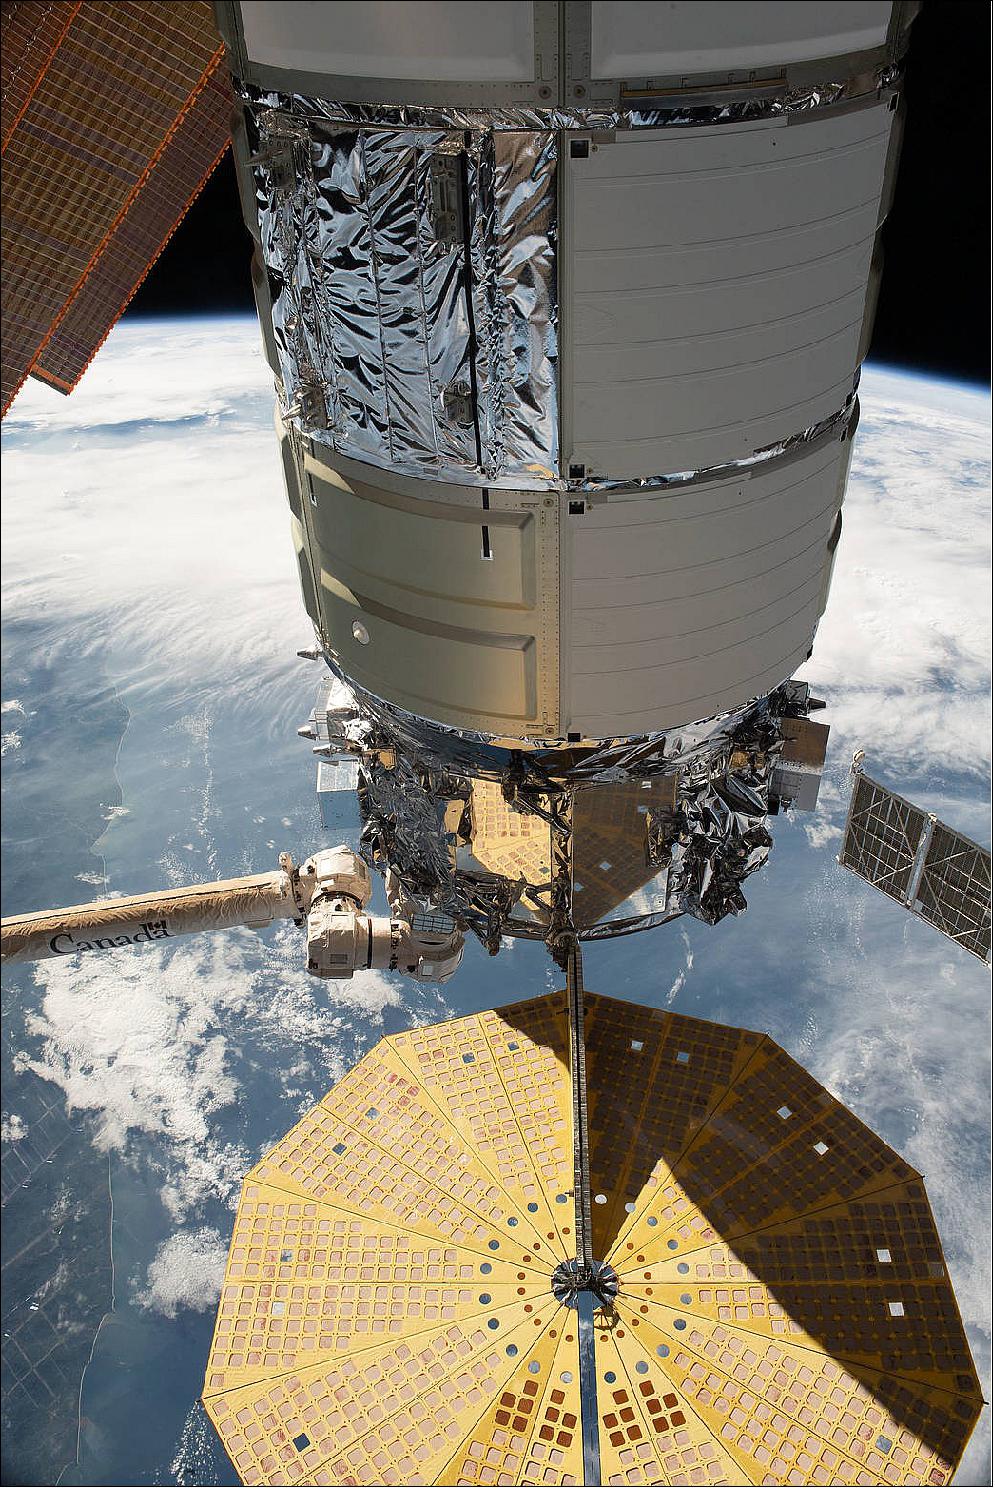 Figure 3: The Northrop Grumman Cygnus space freighter is pictured in the grips of the Canadarm2 robotic arm after it was installed on the Unity module's Earth-facing port (image credit: NASA TV,, Mark Garcia)